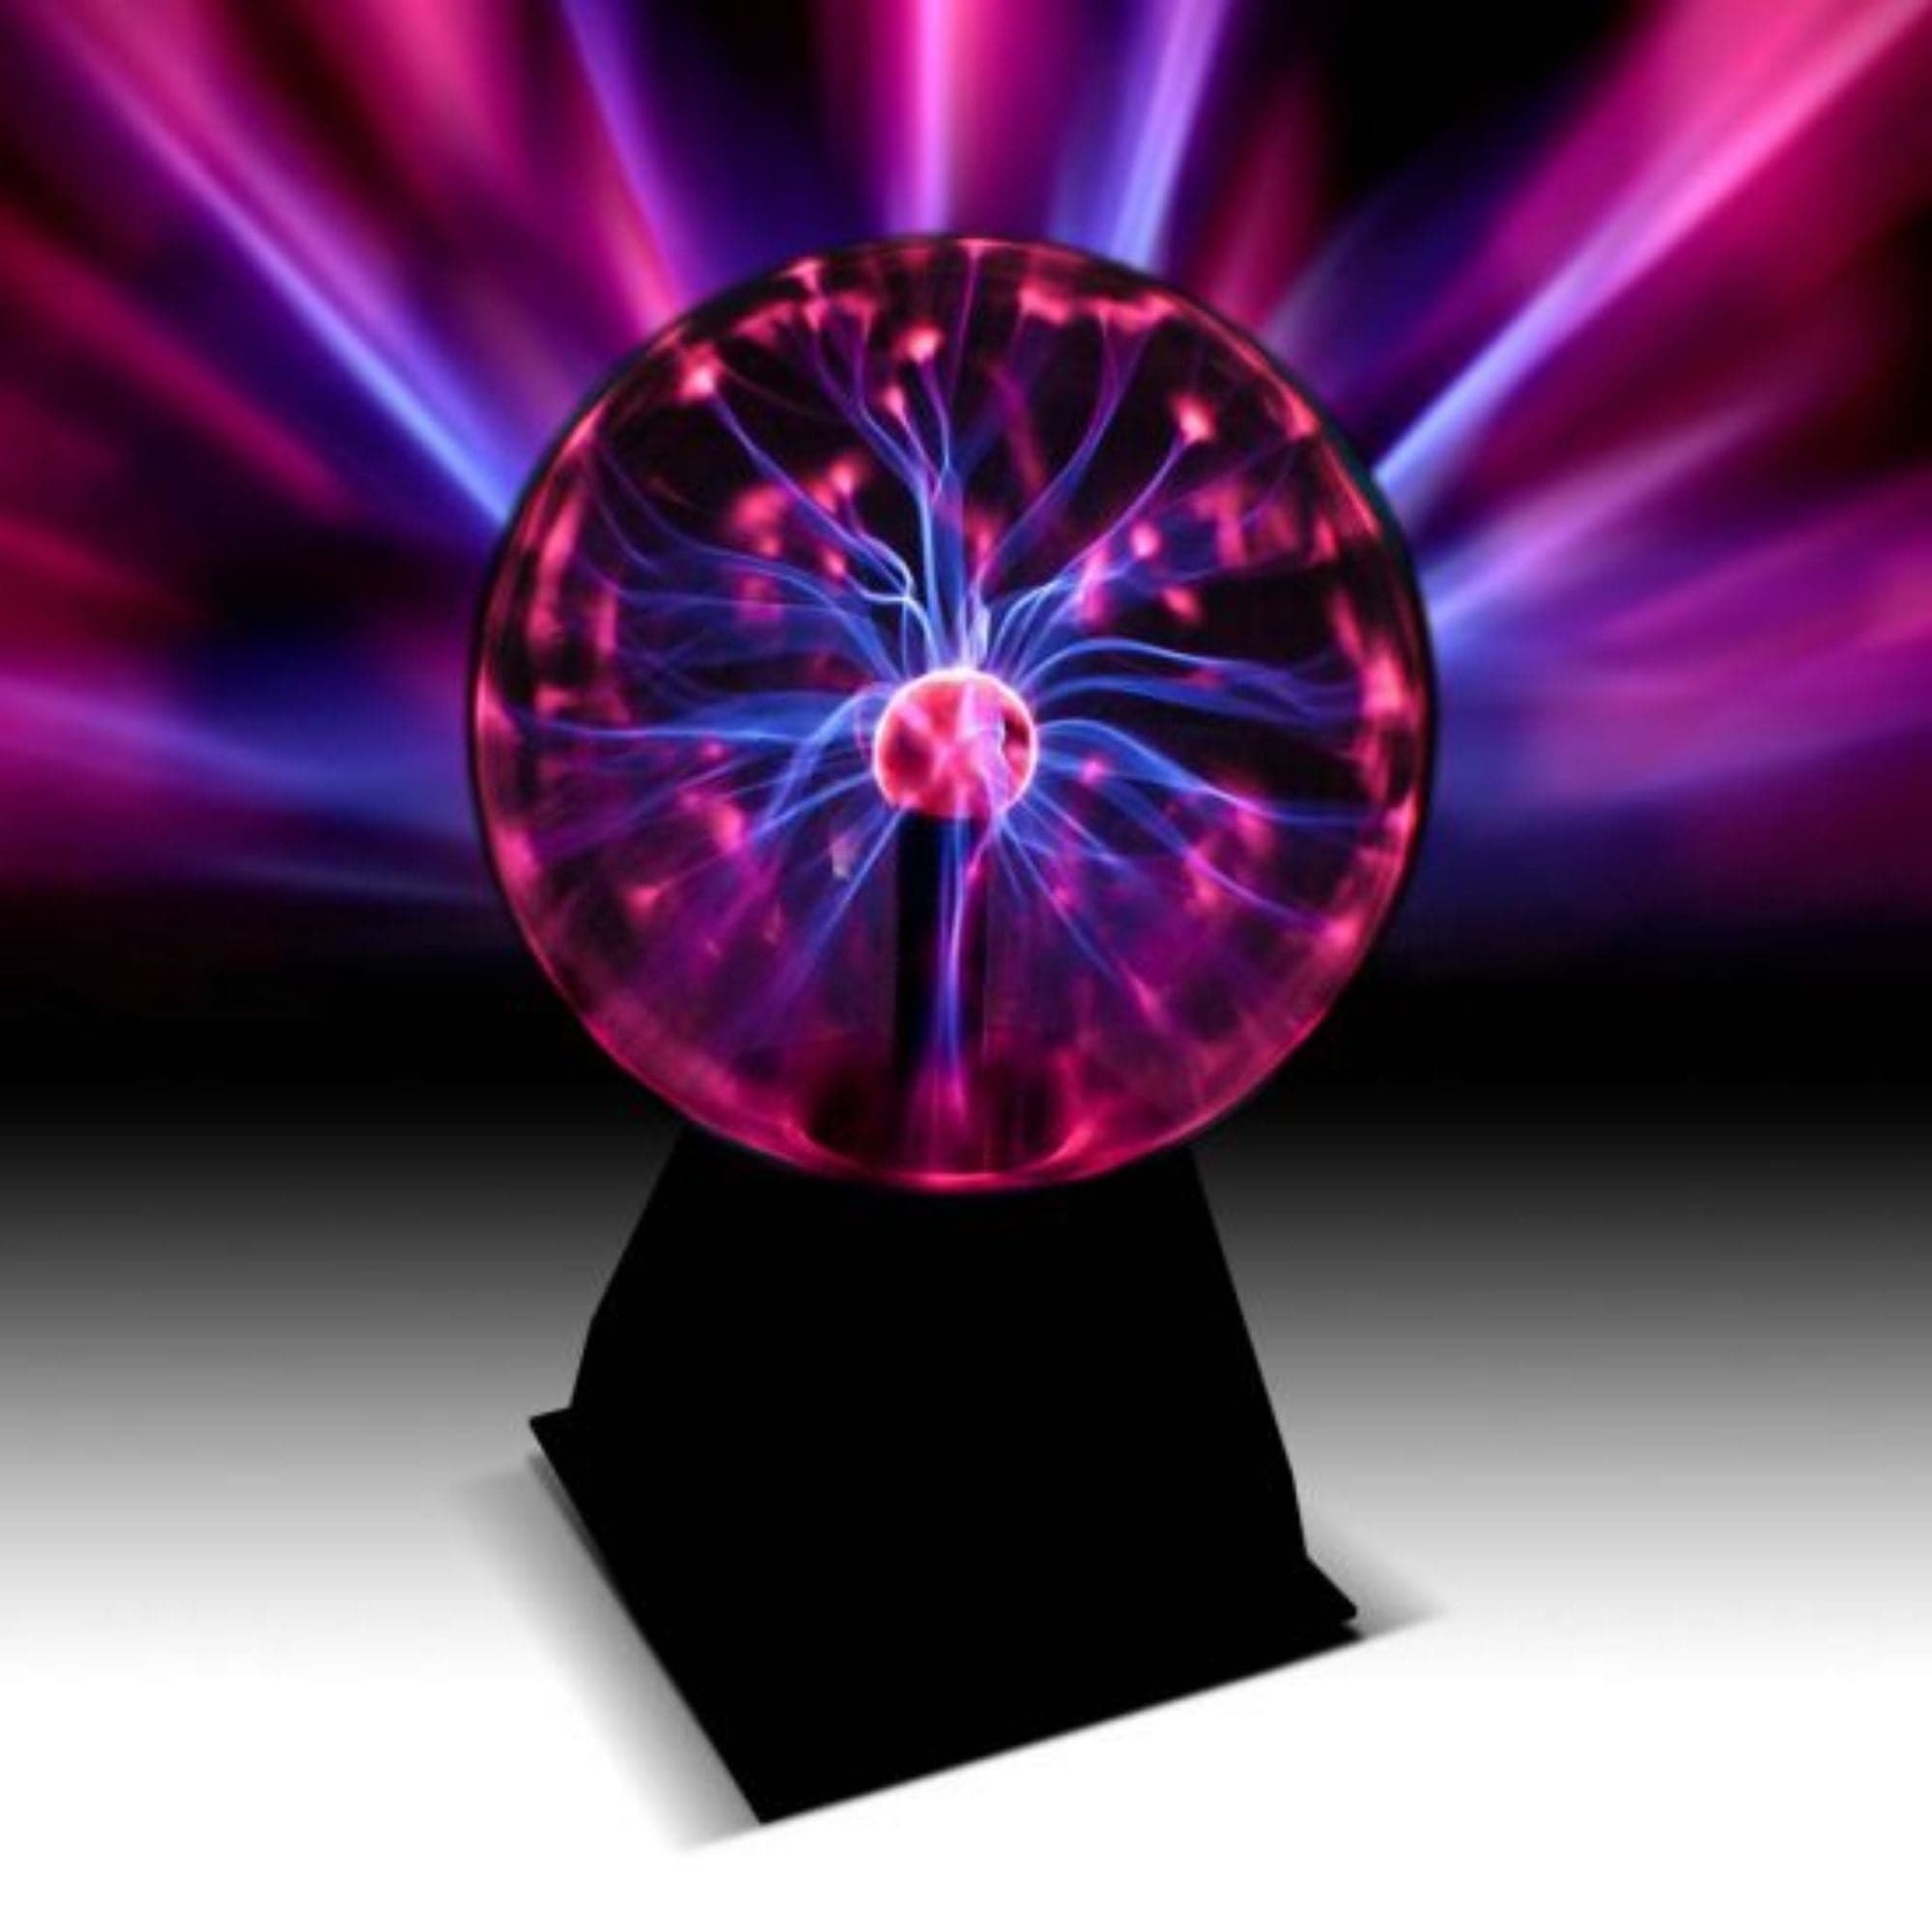 Large Plasma Ball, Like something from Doctor Frankenstein’s lab, this Large Plasma Ball lighting effect puts the power of lightning at your fingertips. Move your fingers along the outside of the Large Plasma ball and watch as the lightning streaks react to your touch and move inside the Plasma ball. As fun as the plasma ball is to play with, it is also makes a great visual effect in your home or bedroom. Simply connect the 12V 1A power supply to the plasma ball and connect it into the mains wall socket. Fl